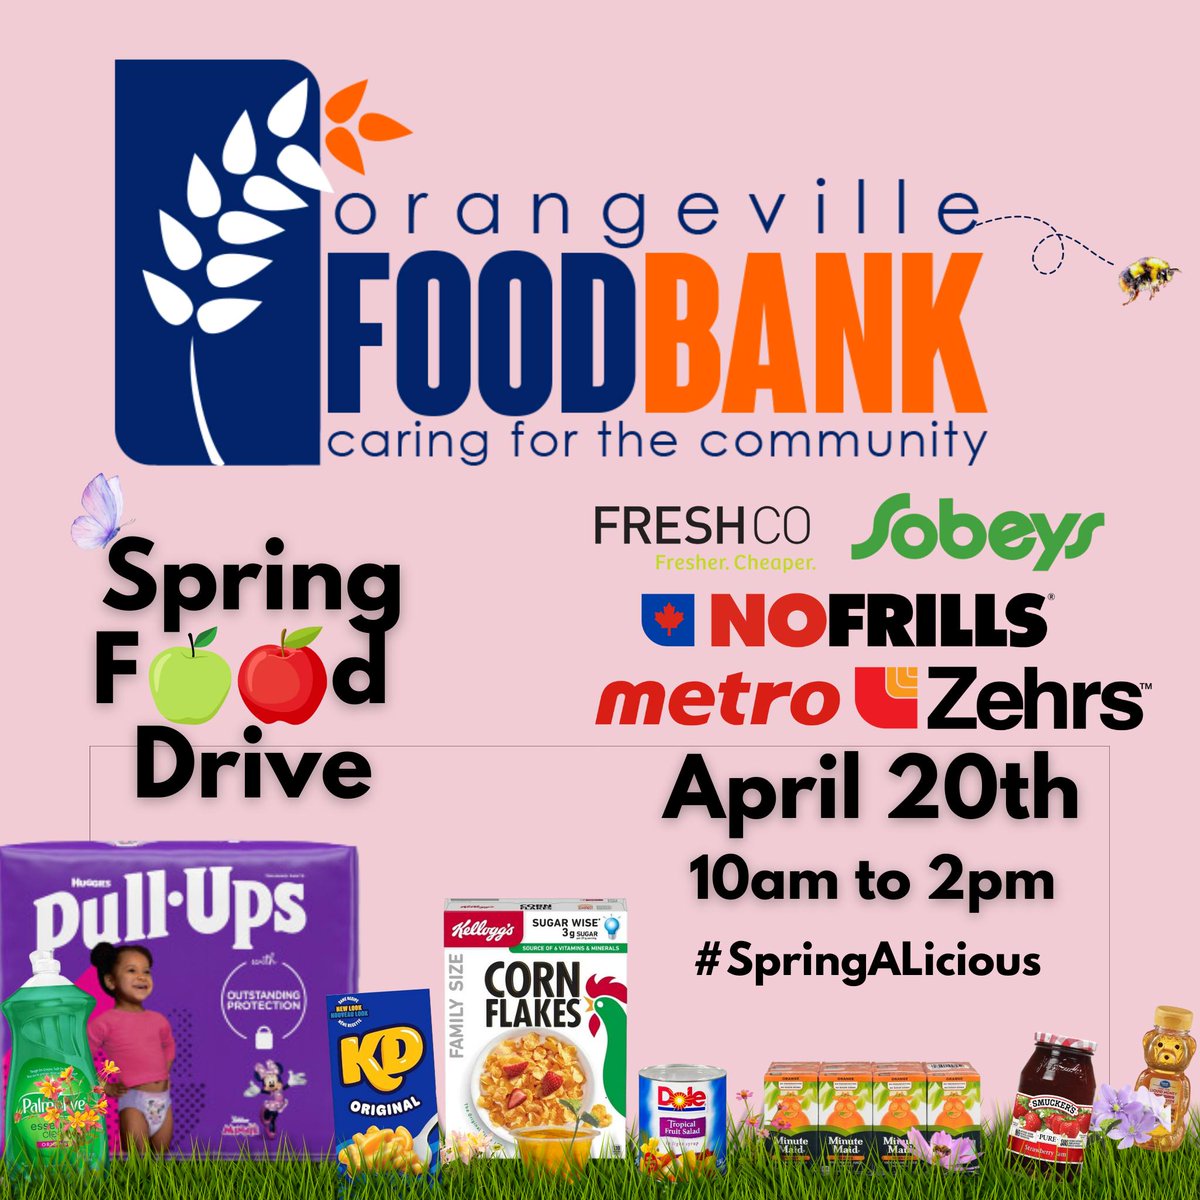 TODAY!!!!  Spring Food Drive at participating grocery stores.  
⏰10am-2pm
#Orangeville #DufferinCounty #FoodDrive #Community #SpringALicious